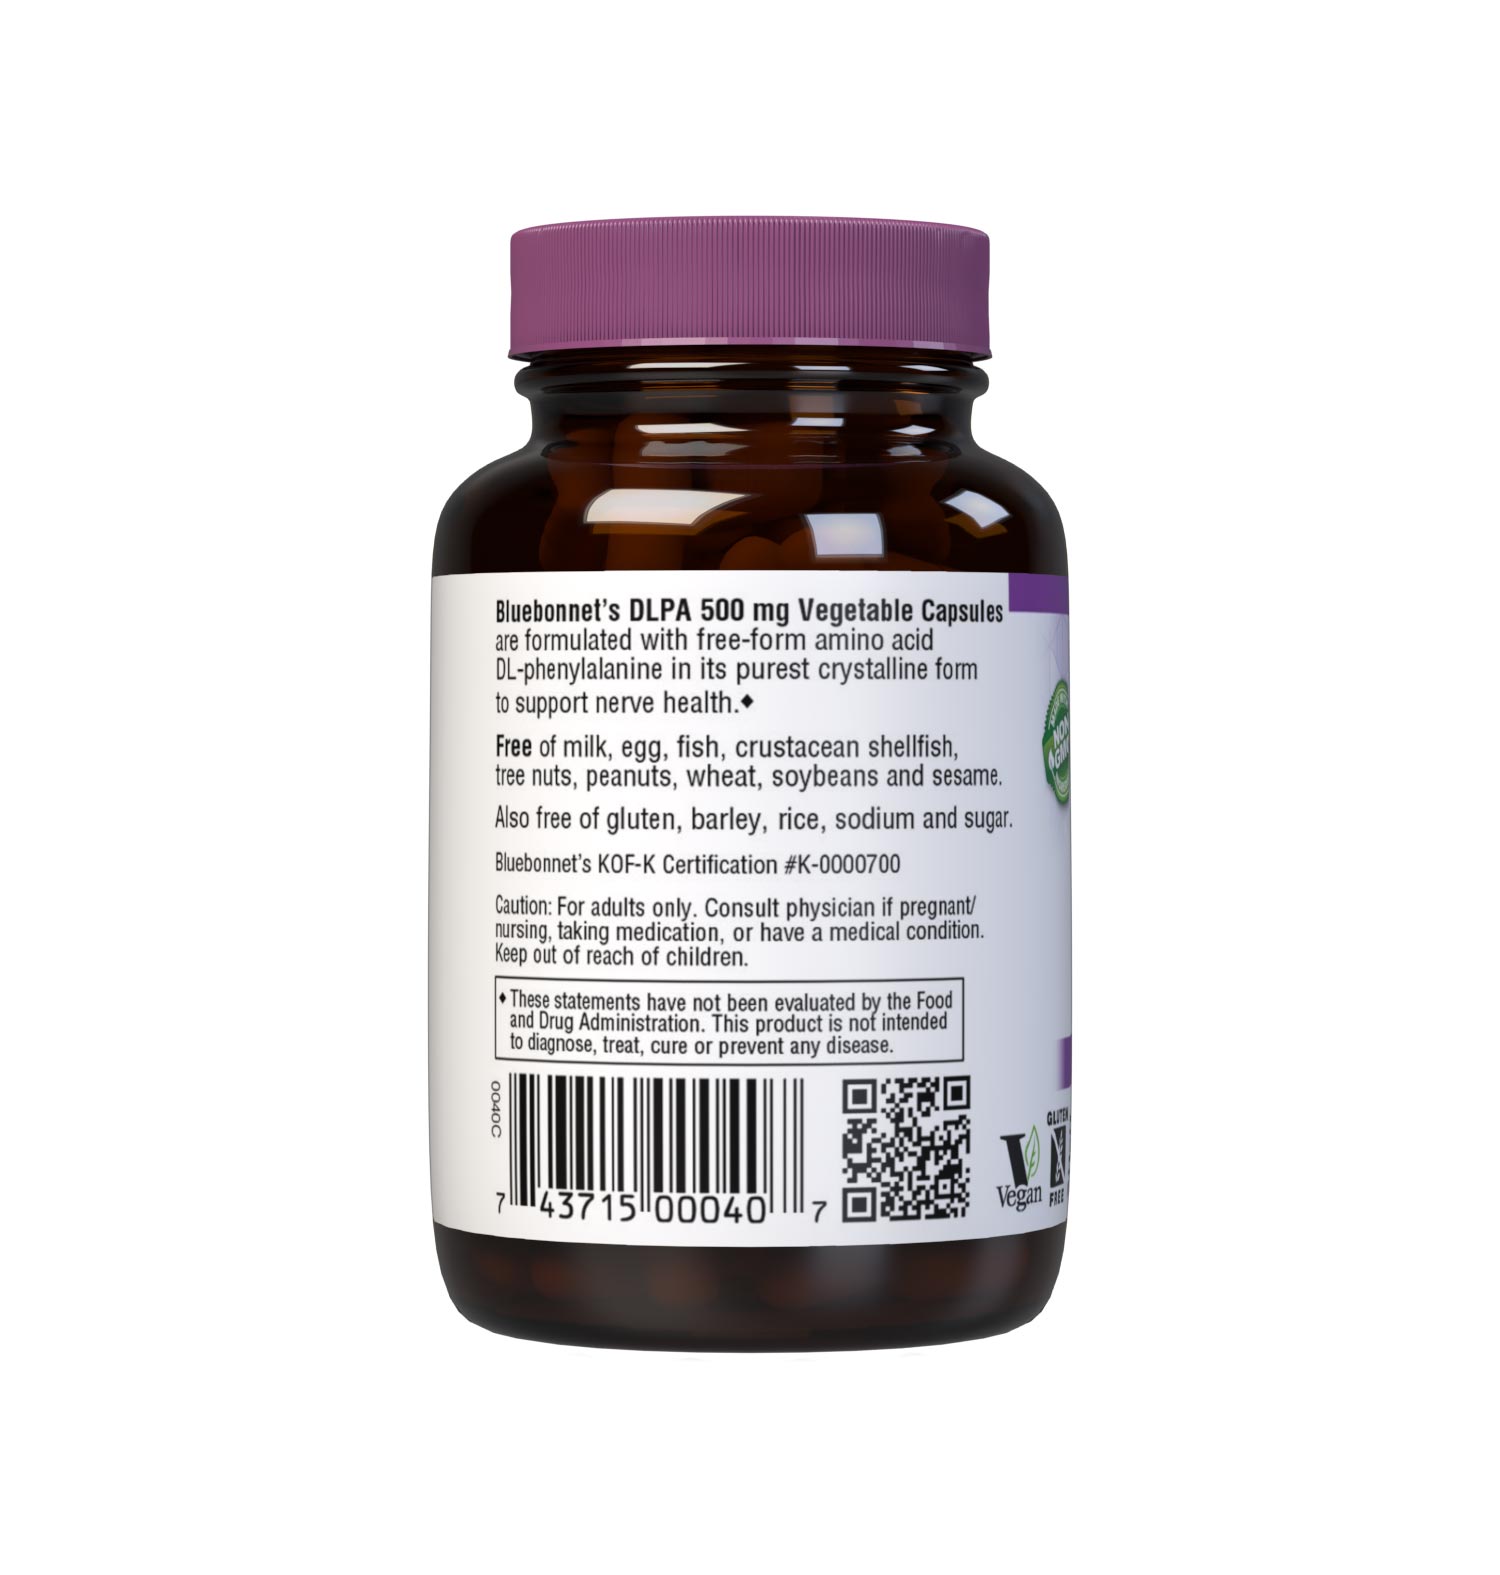  Bluebonnet’s DLPA 500 mg 30 Vegetable Capsules are formulated with free-form amino acid DL-phenylalanine in its crystalline form to support nerve health. description side render image. description panel. #size_30 count